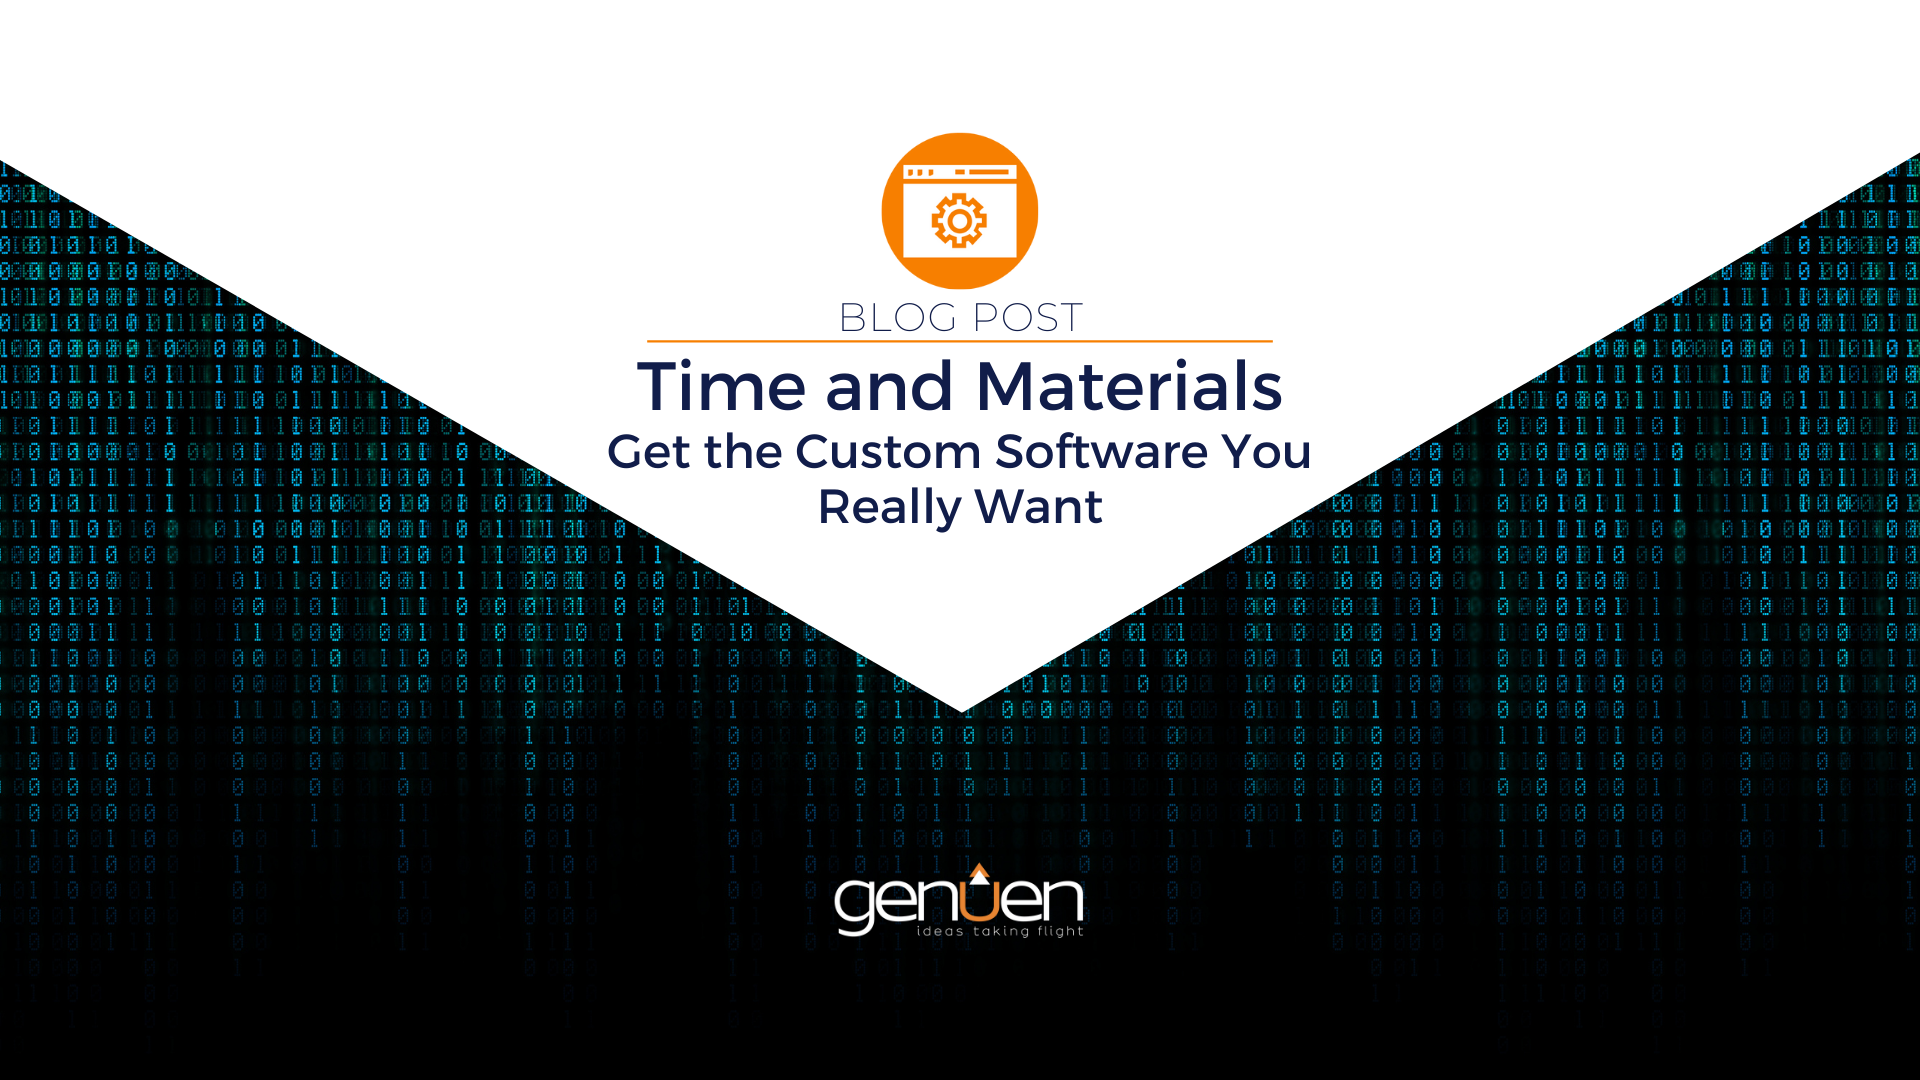 Time and Materials Get the Custom Software You Really Want